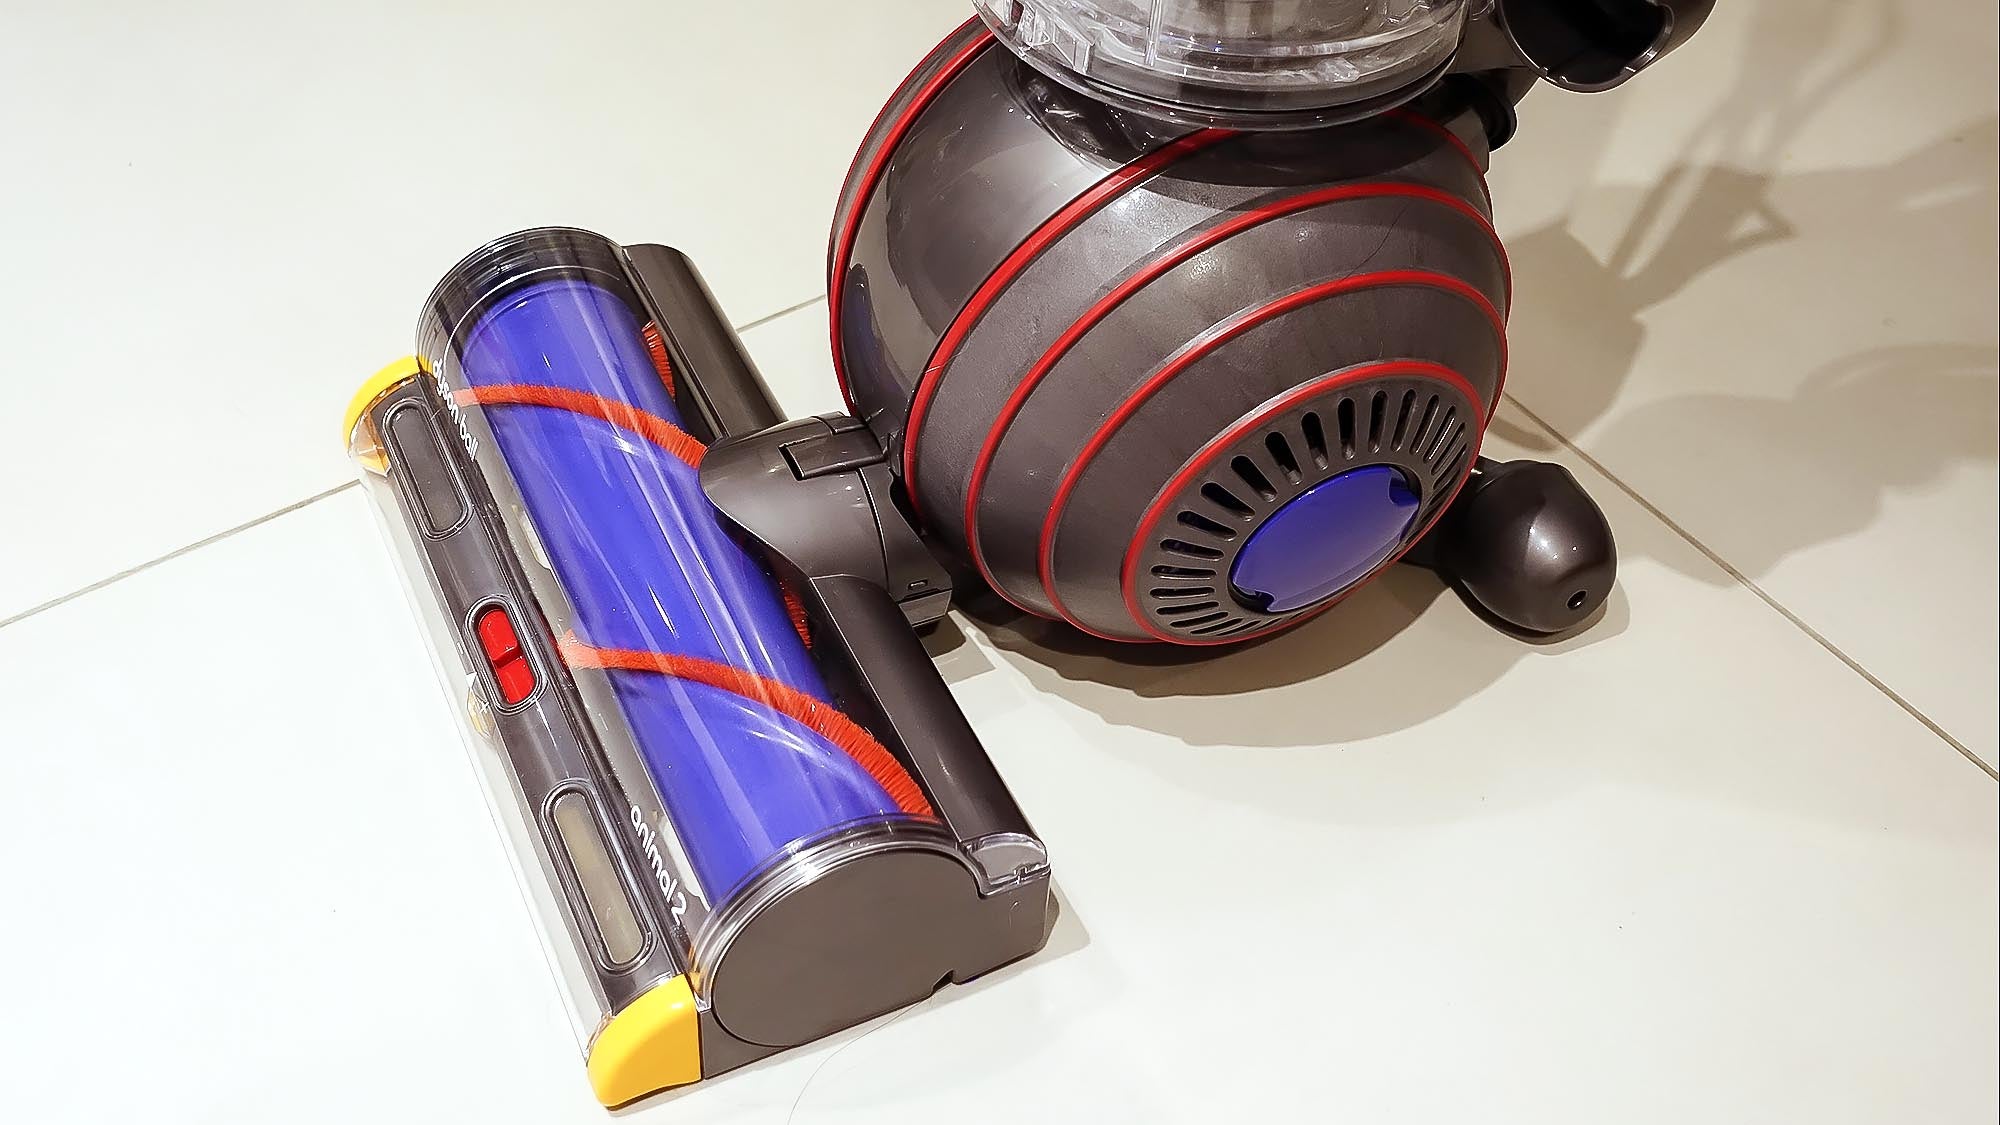 Dyson Ball Animal 2 review: Tackle pet hair and tricky cleaning jobs with ease | Reviews